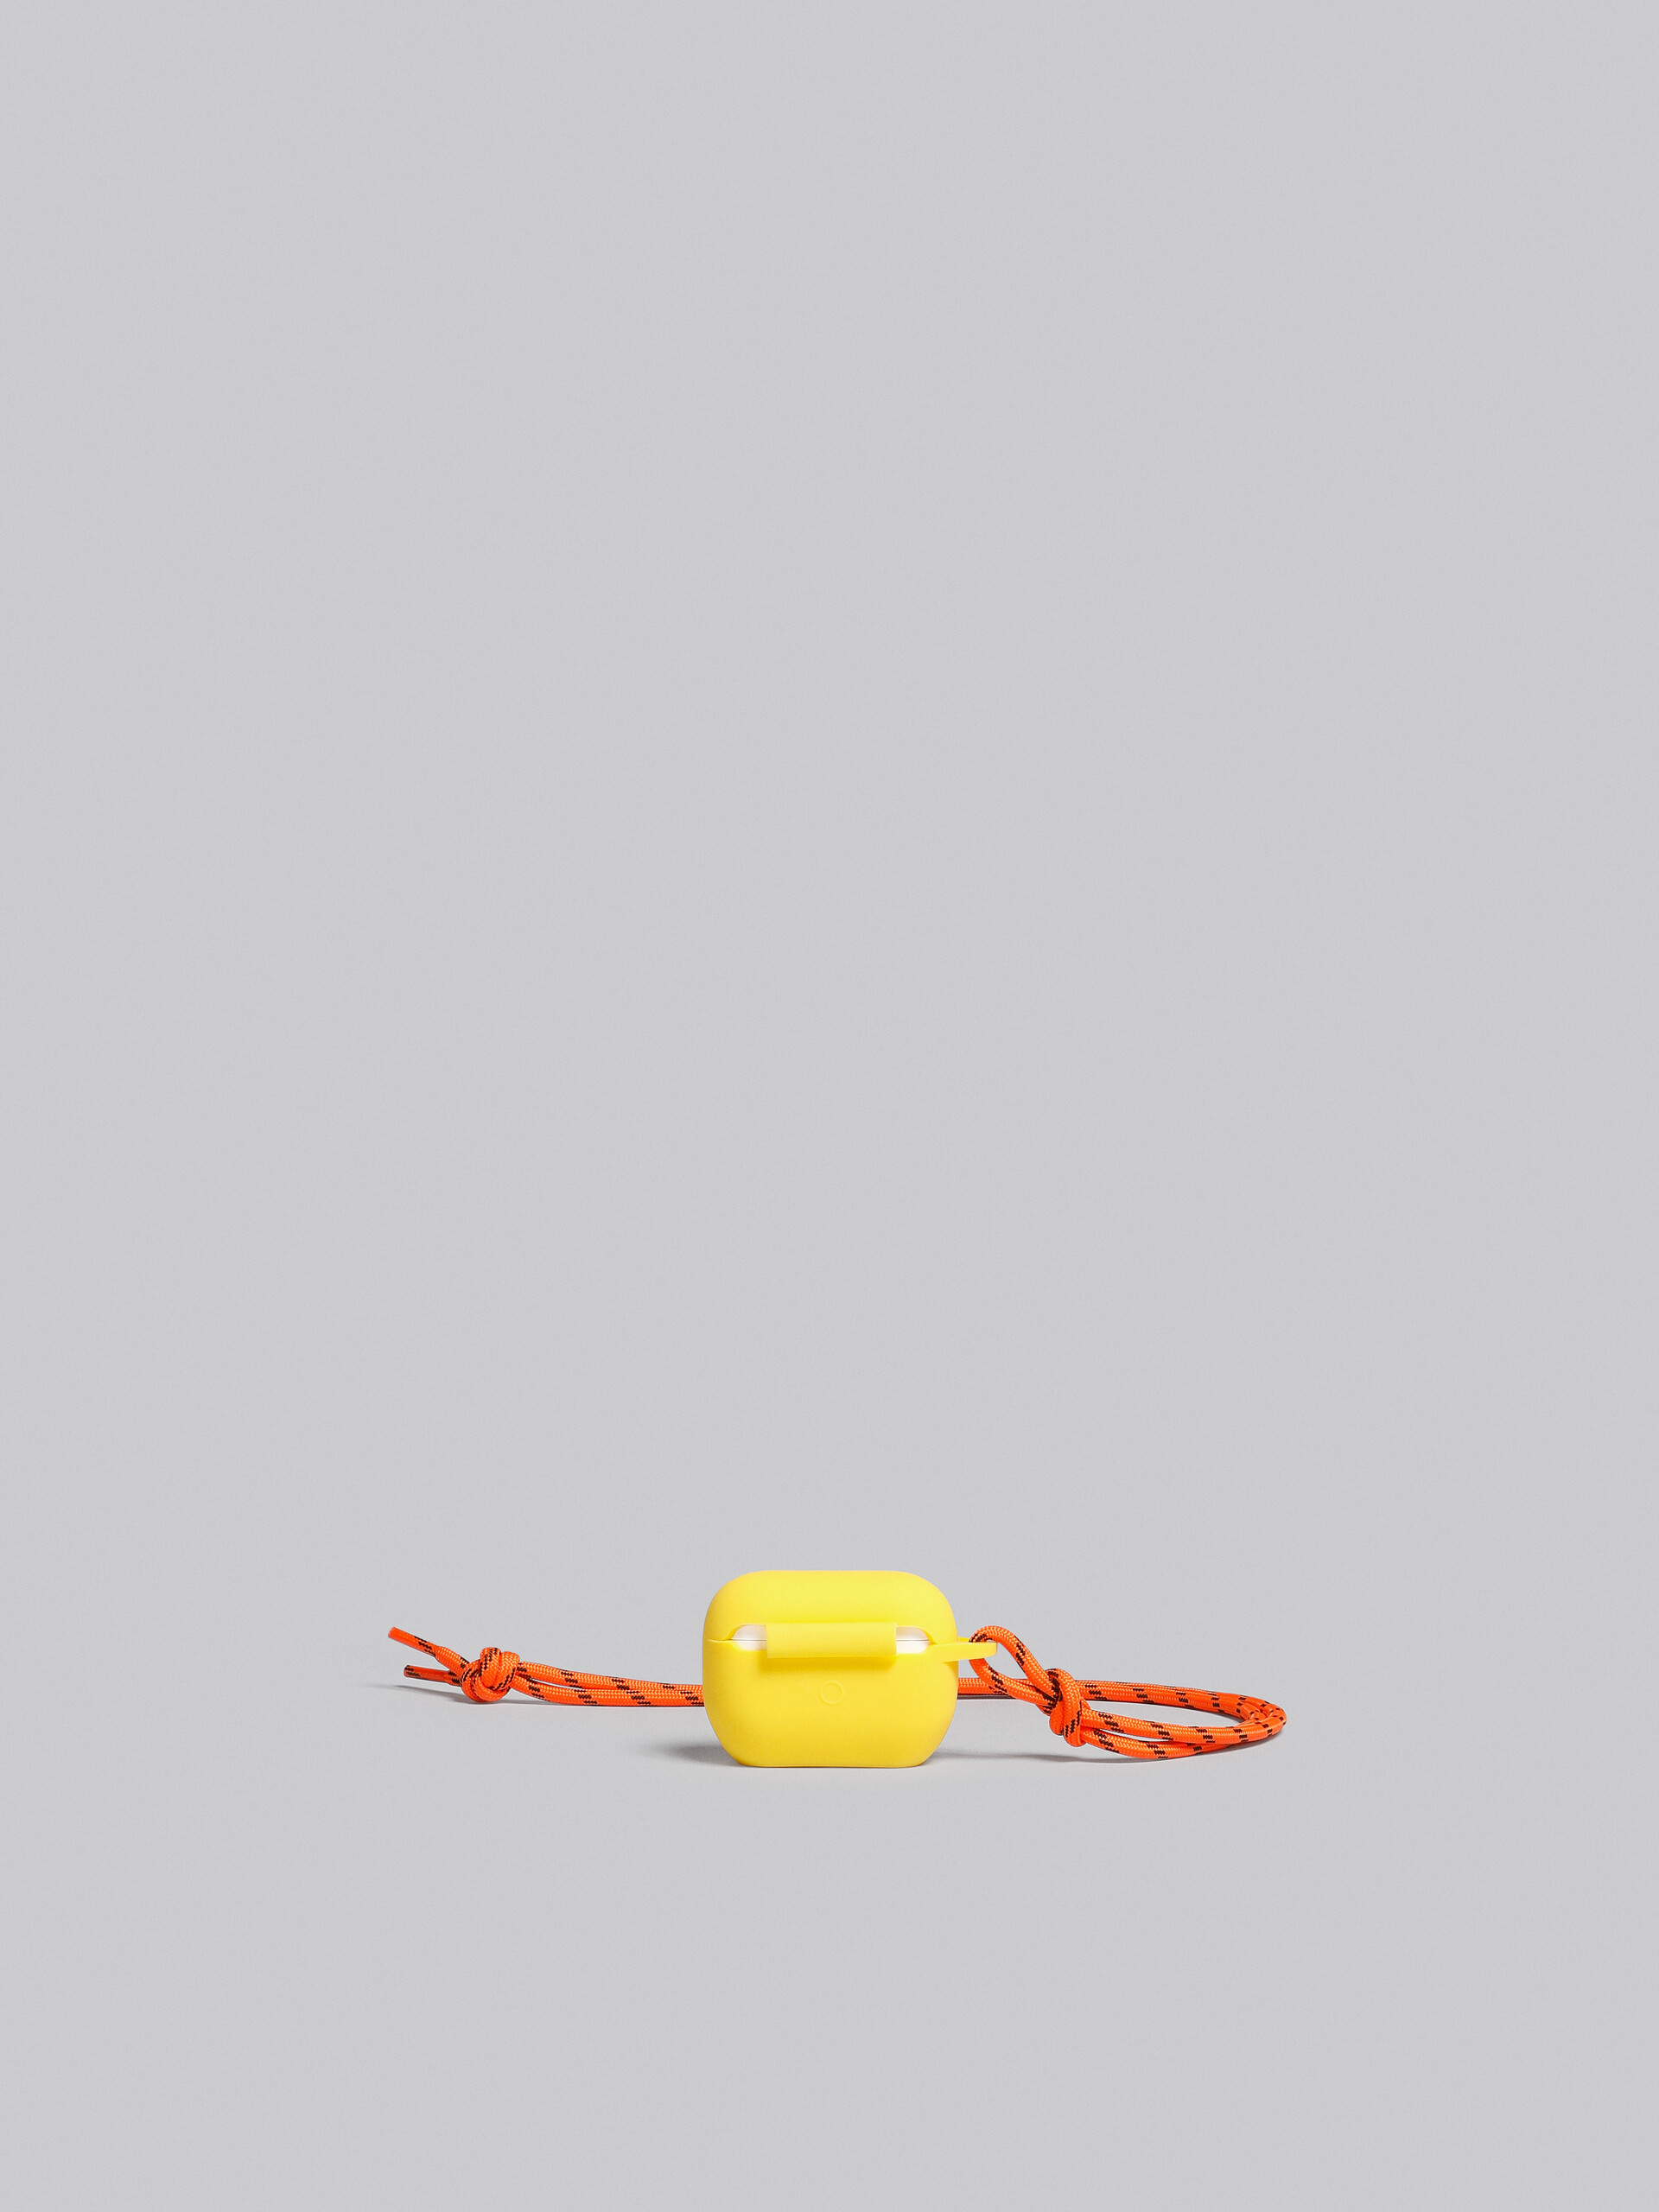 Marni x No Vacancy Inn - Yellow and orange Airpods case - Other accessories - Image 2